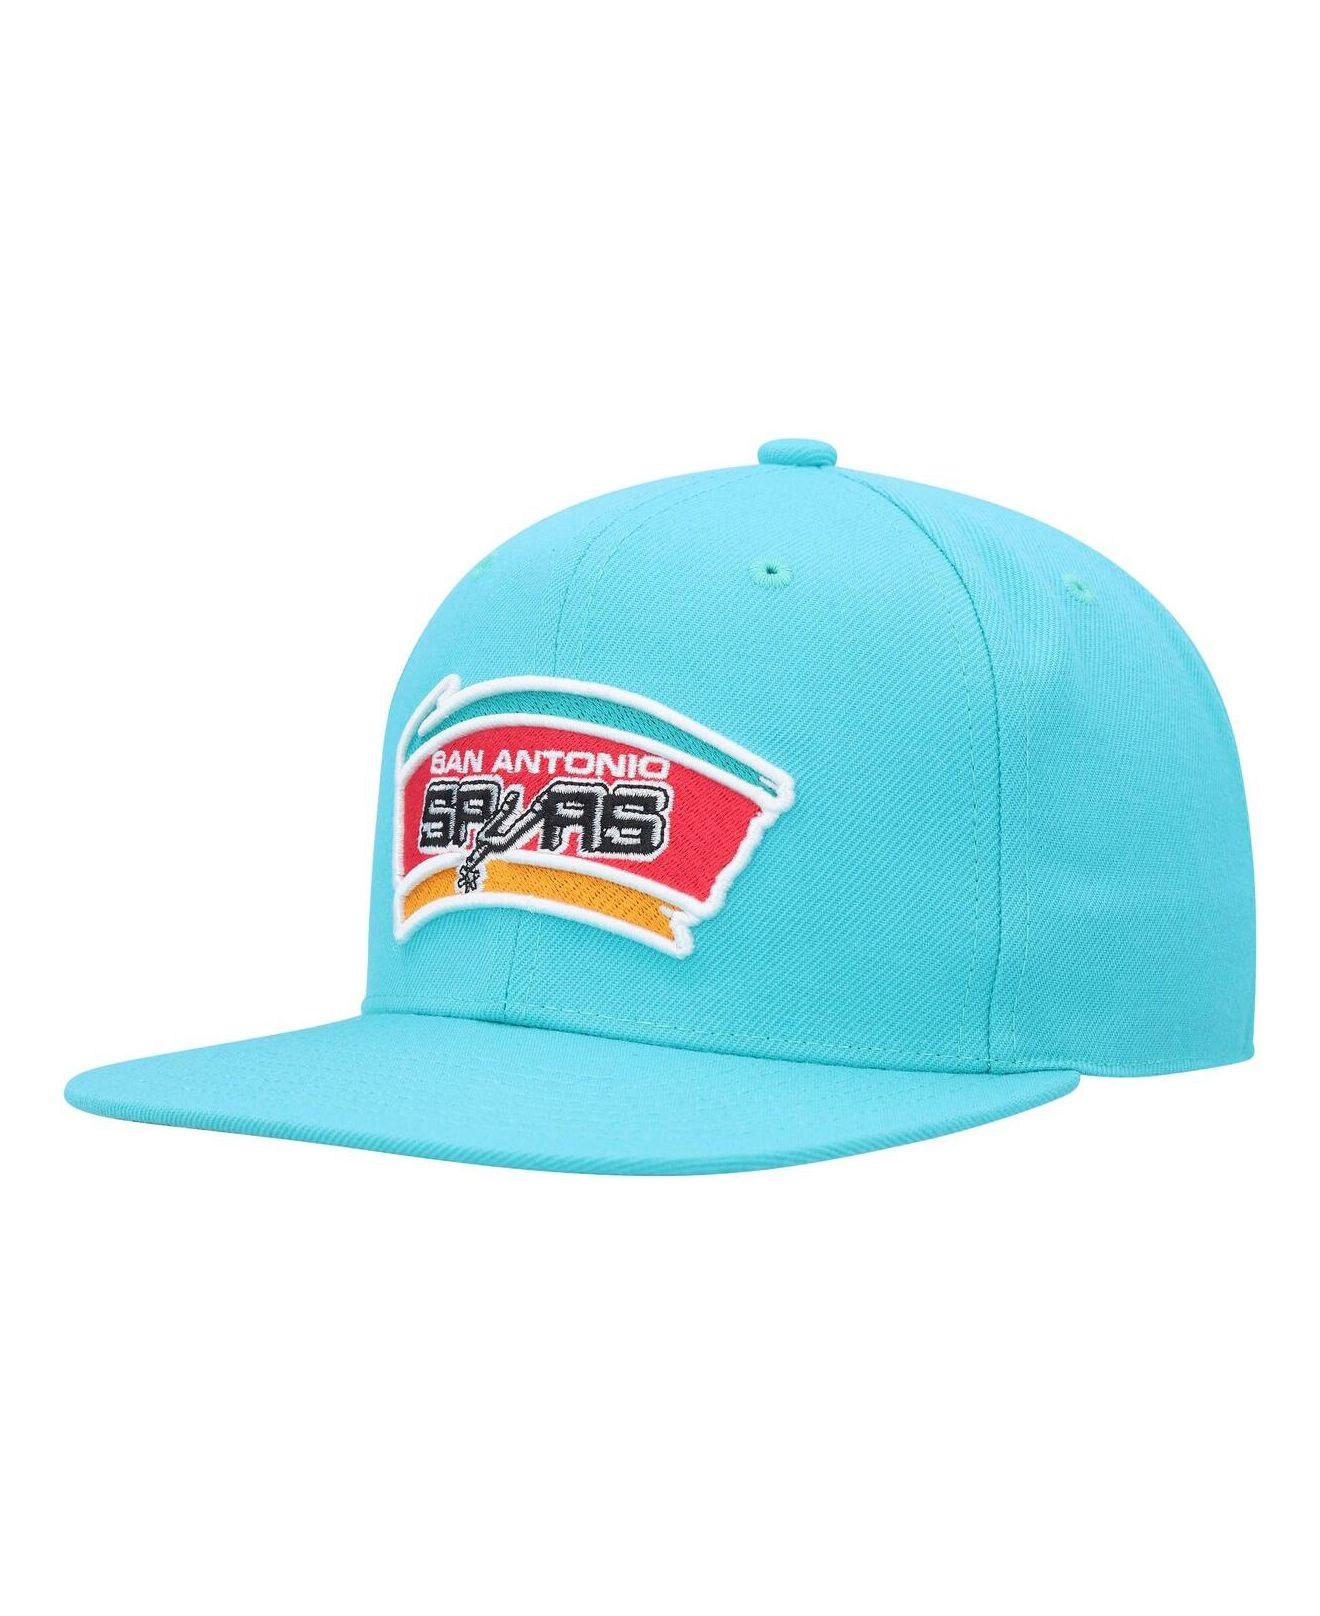 Mitchell & Ness Teal Charlotte Hornets Hardwood Classics MVP Team Ground 2.0 Fitted Hat